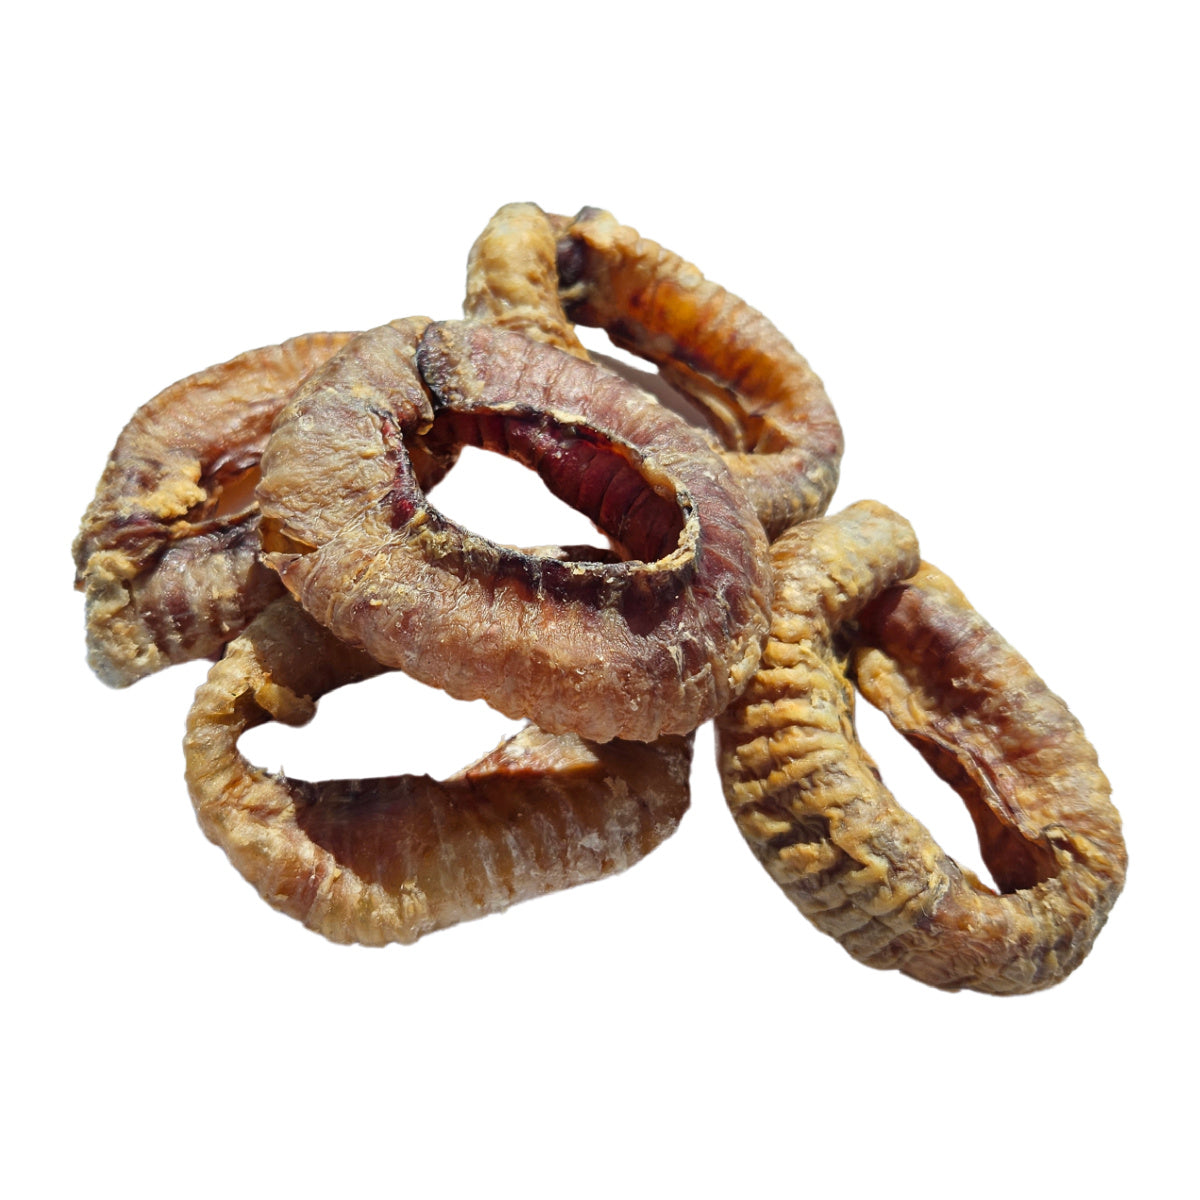 Lamb trachea rings - natural chews for dogs.